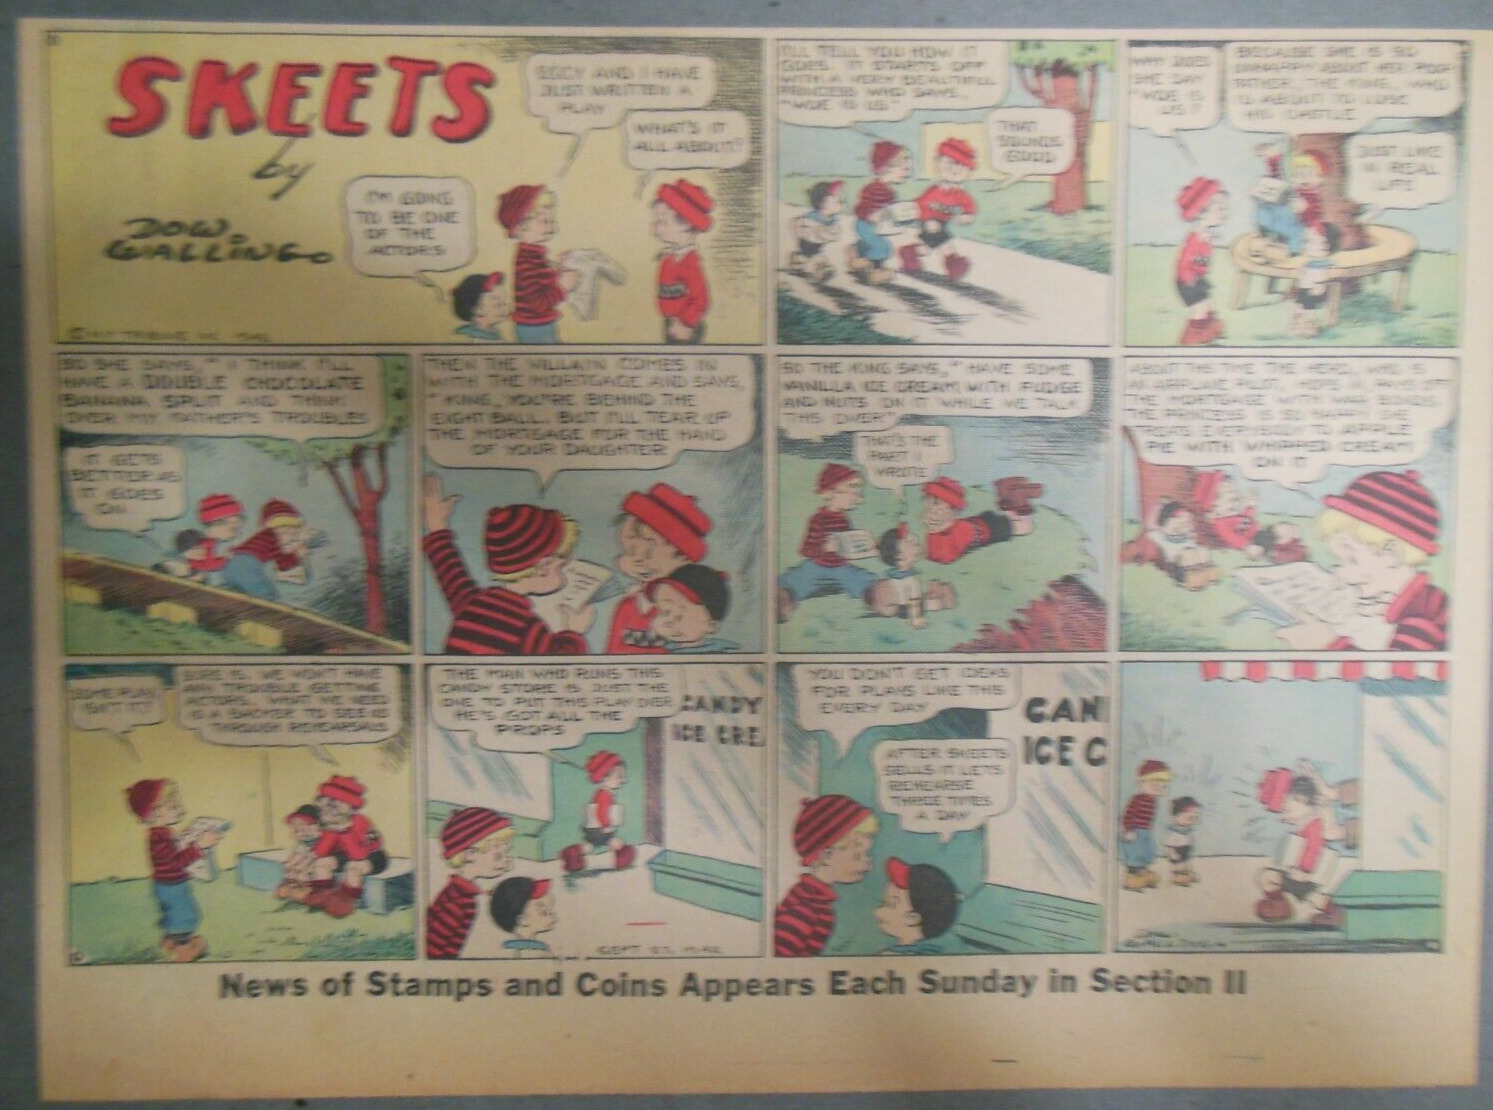 Skeets Sunday Page by Dow Walling from 9/27/1943 Half Page Size: 11 x 15 inches